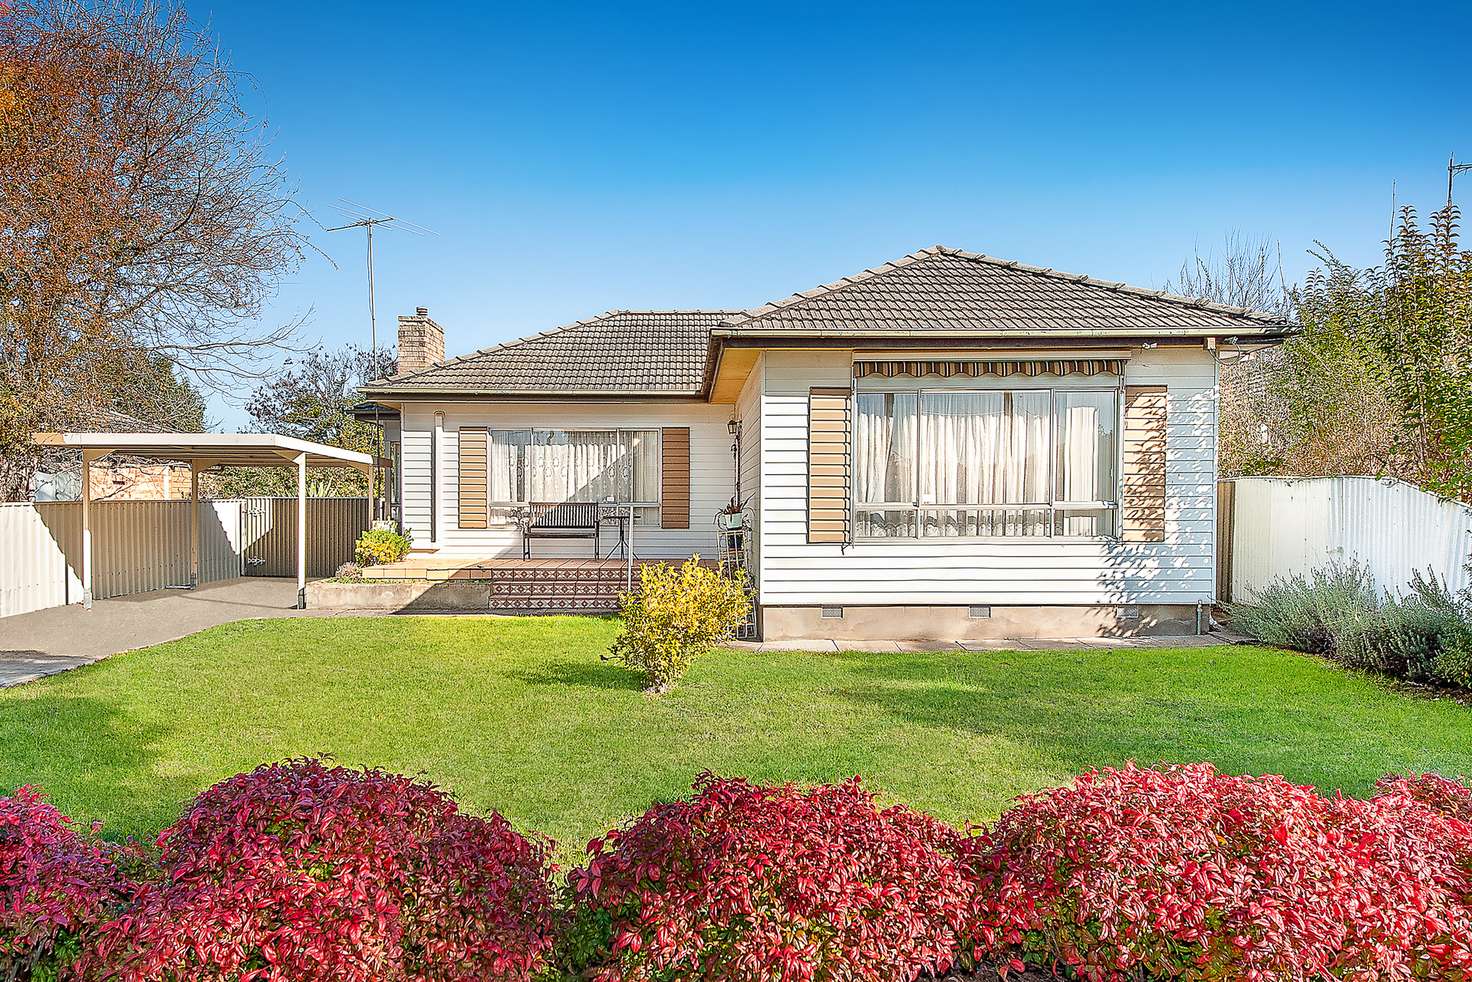 Main view of Homely house listing, 351 Parnall Street, Lavington NSW 2641